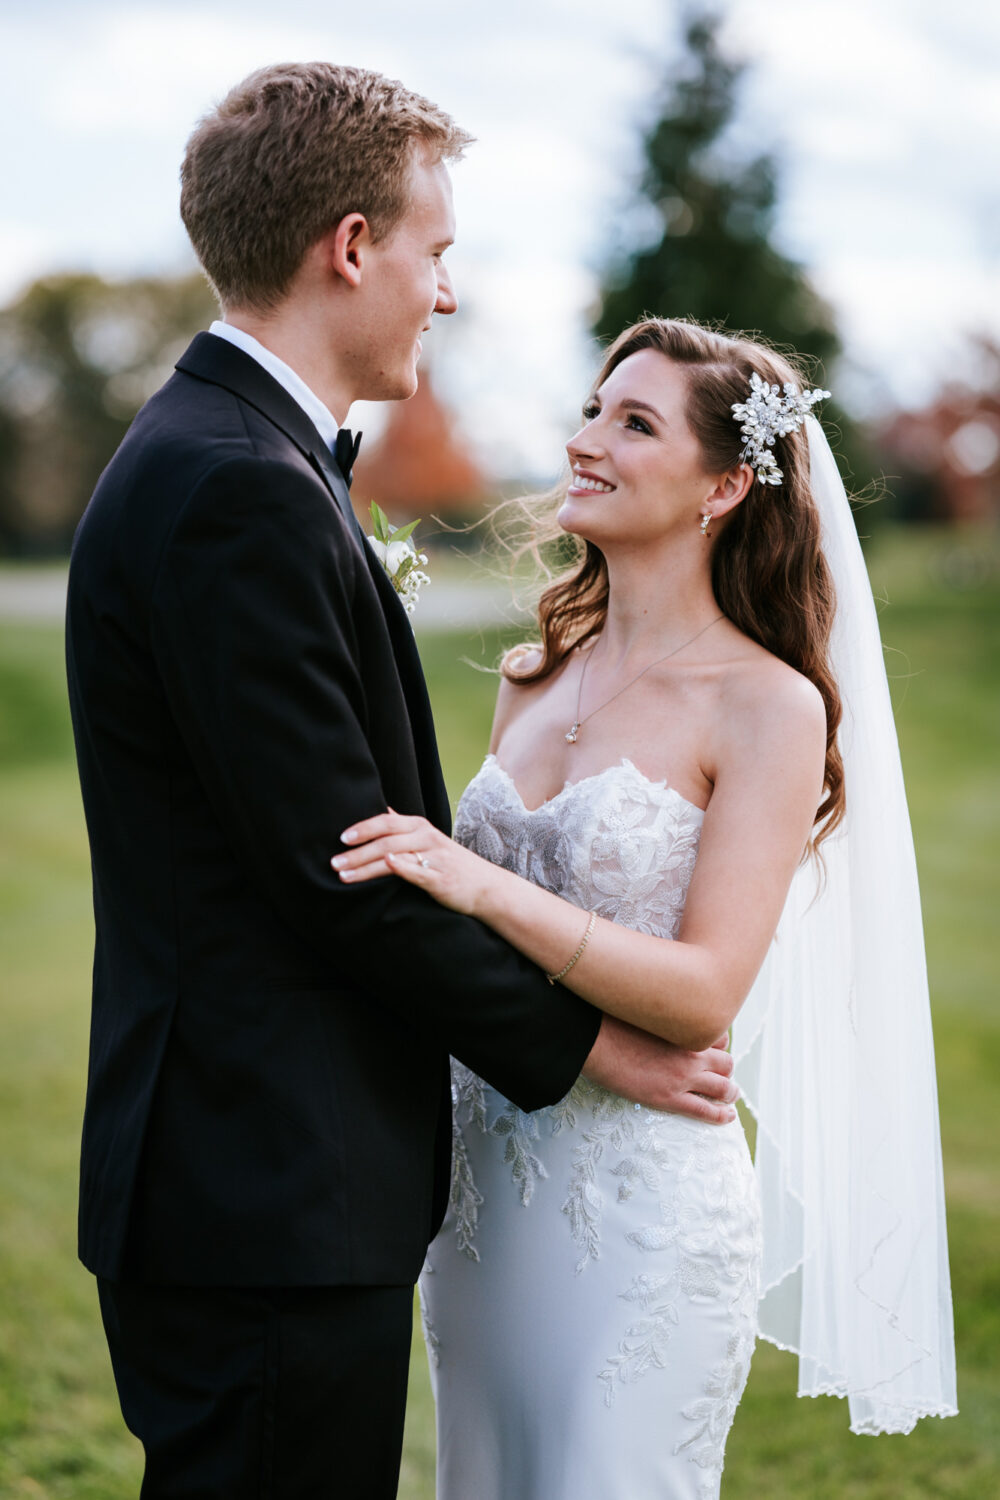 bride and groom looking at each other and smiling together on their wedding day in middleburg va